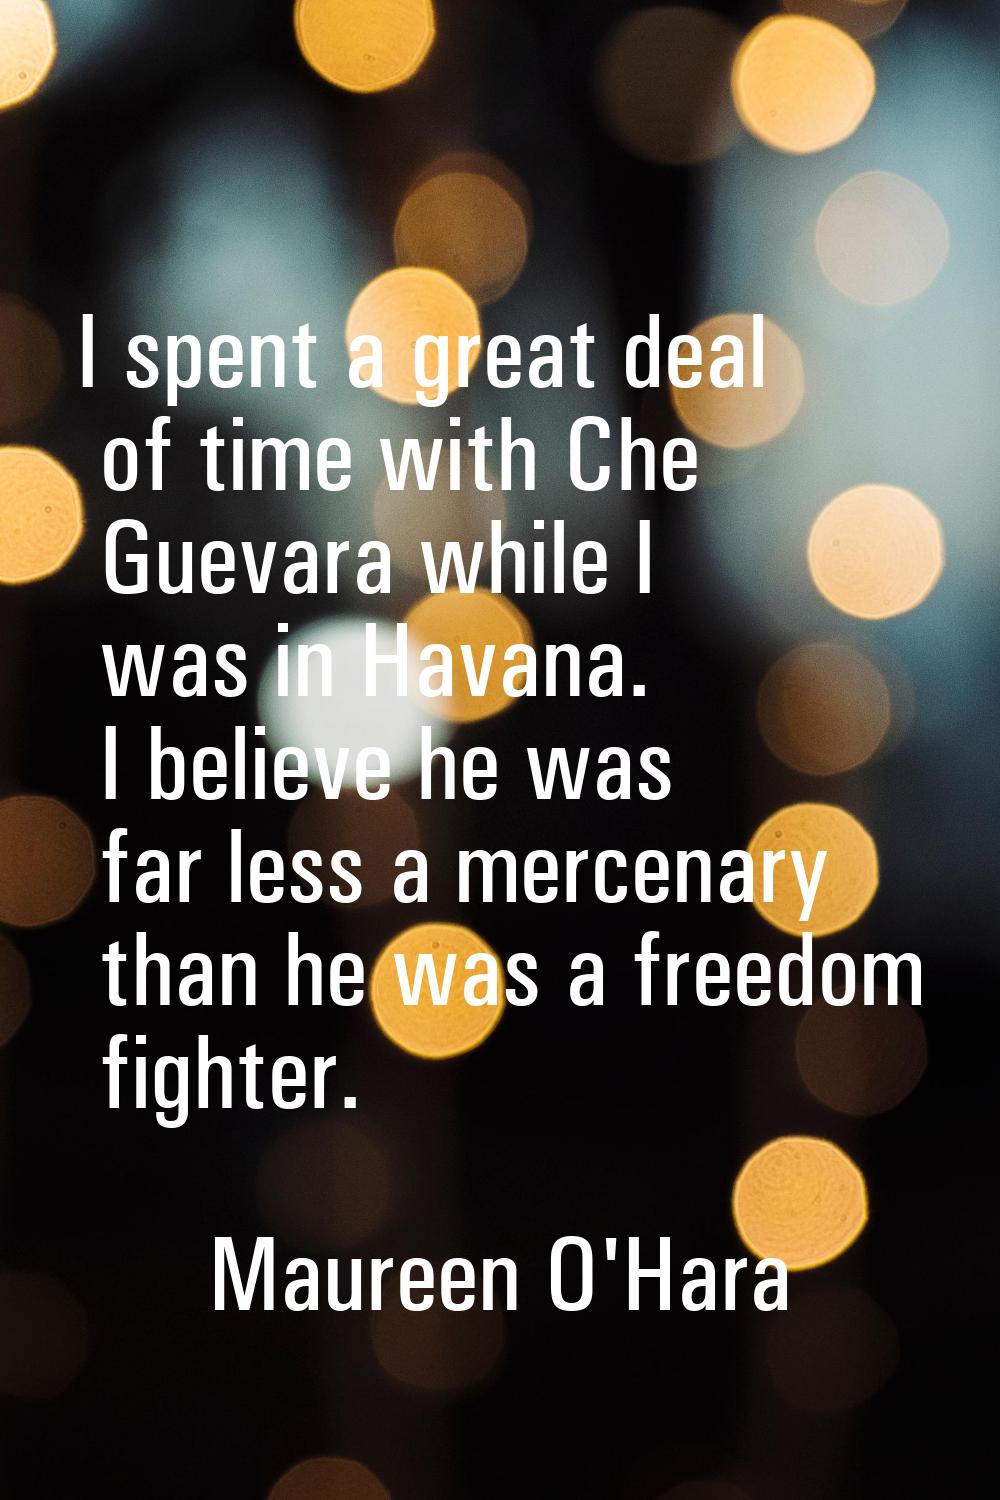 I spent a great deal of time with Che Guevara while I was in Havana. I believe he was far less a me